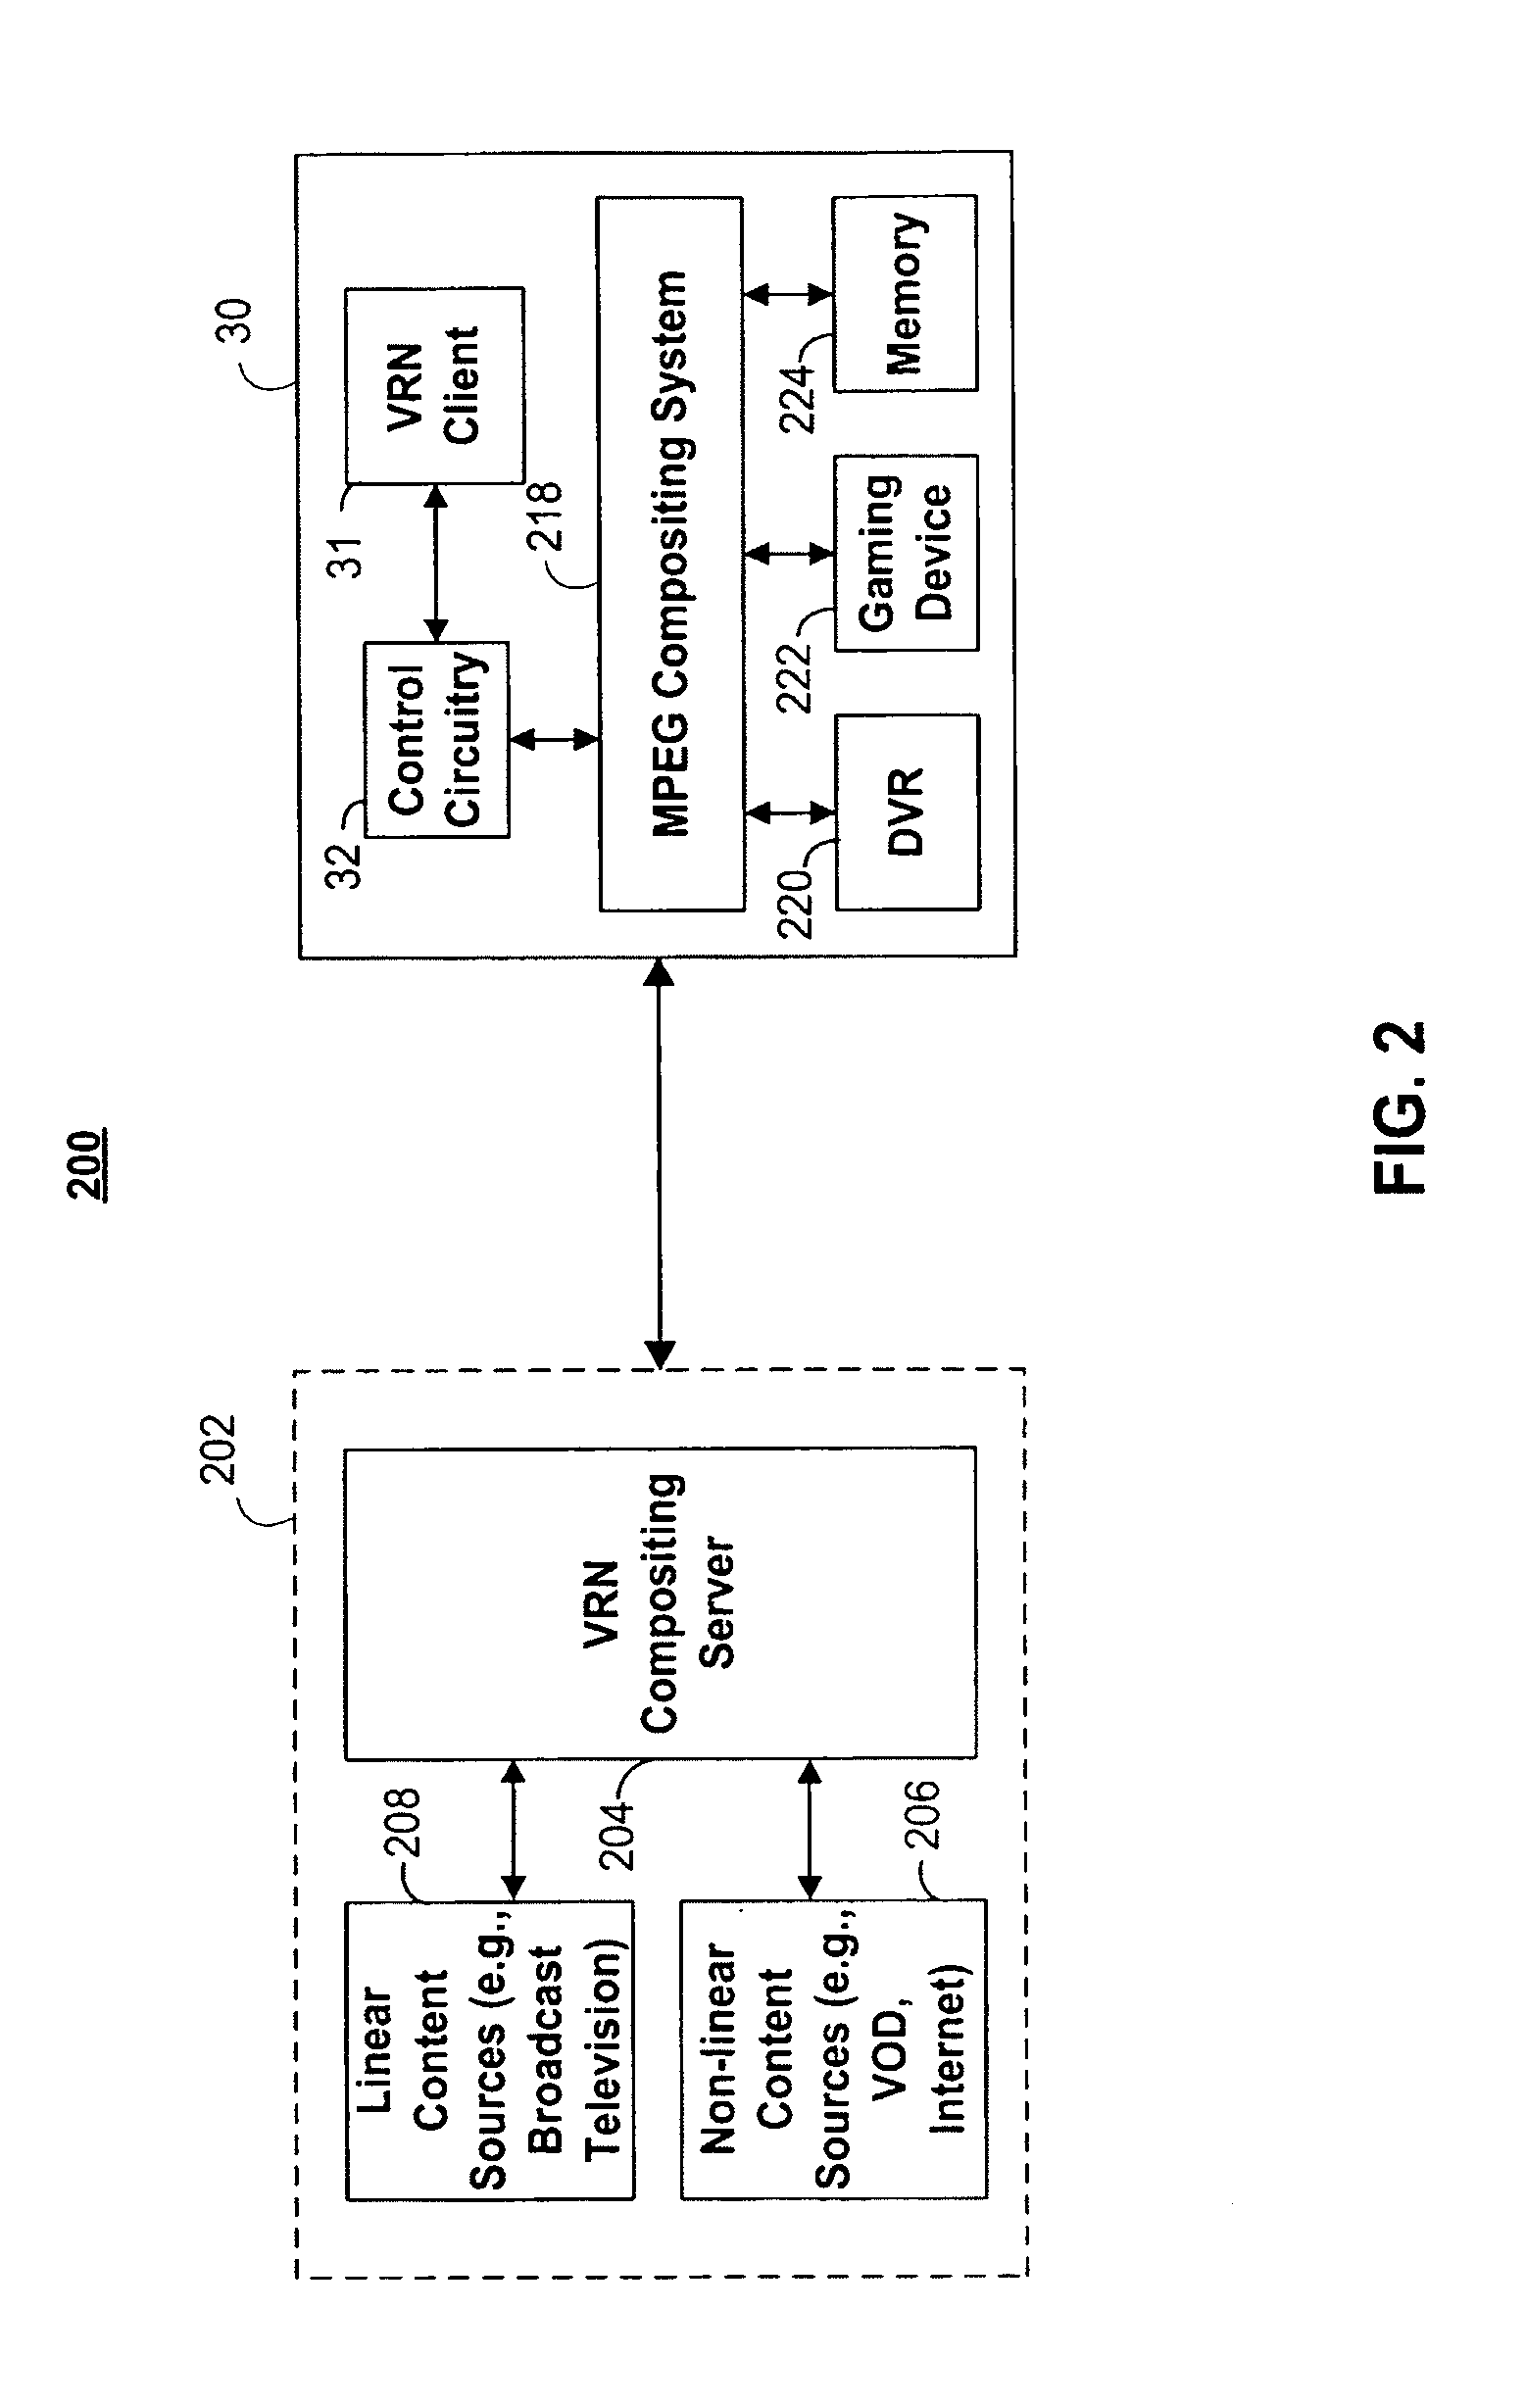 Systems and methods for creating custom video mosaic pages with local content